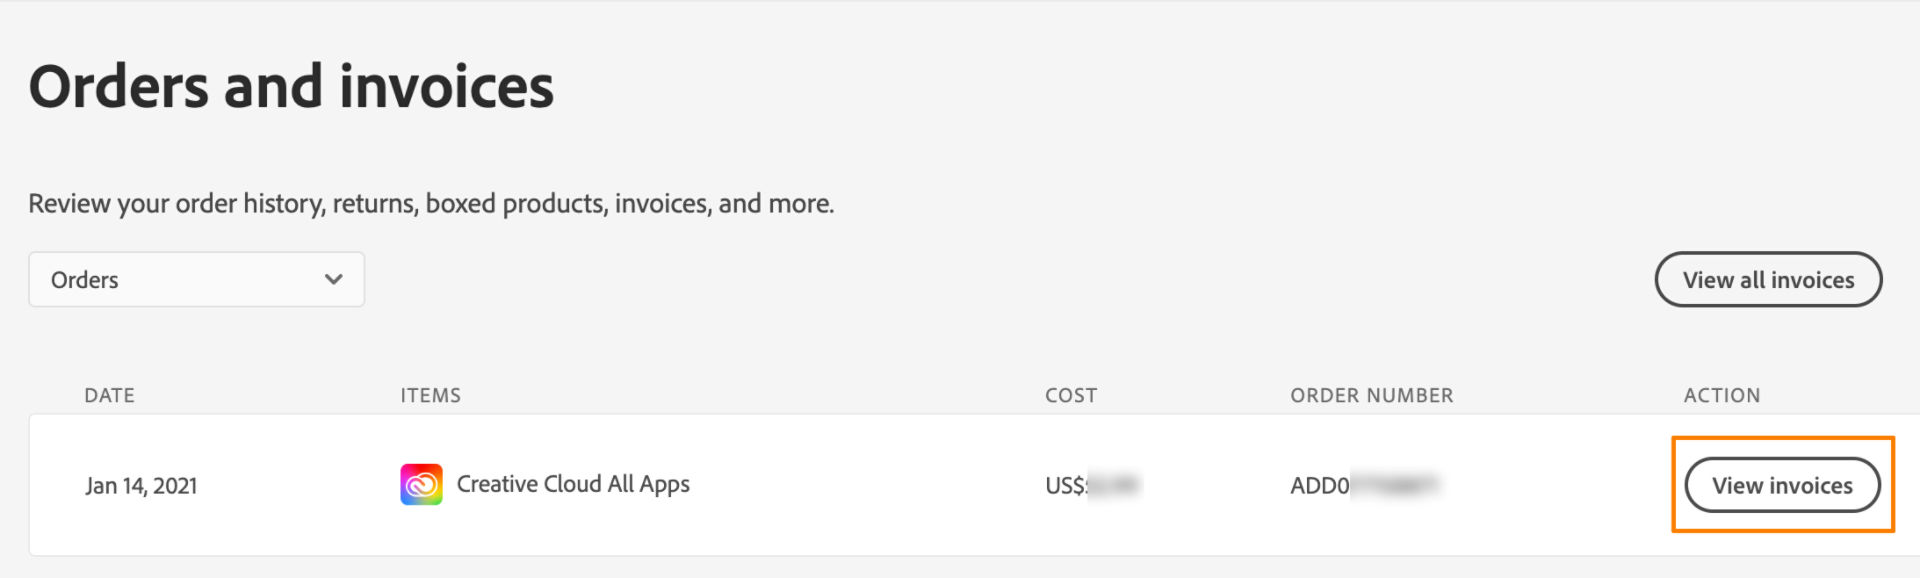 In the Orders and invoices section, select View invoices